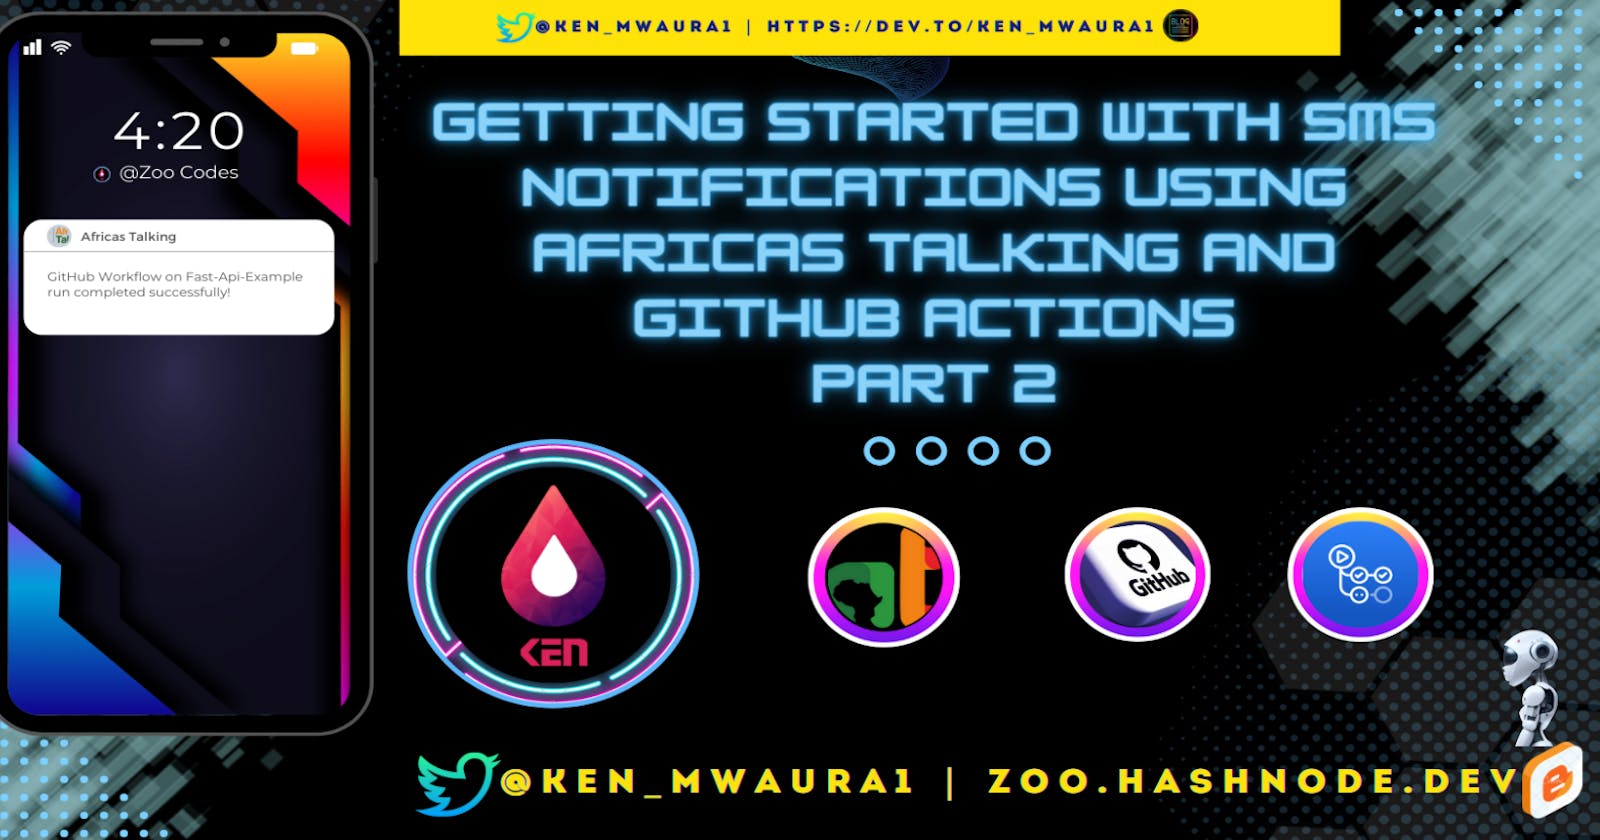 Getting Started with SMS Notifications using Africas Talking and GitHub Actions Part 2